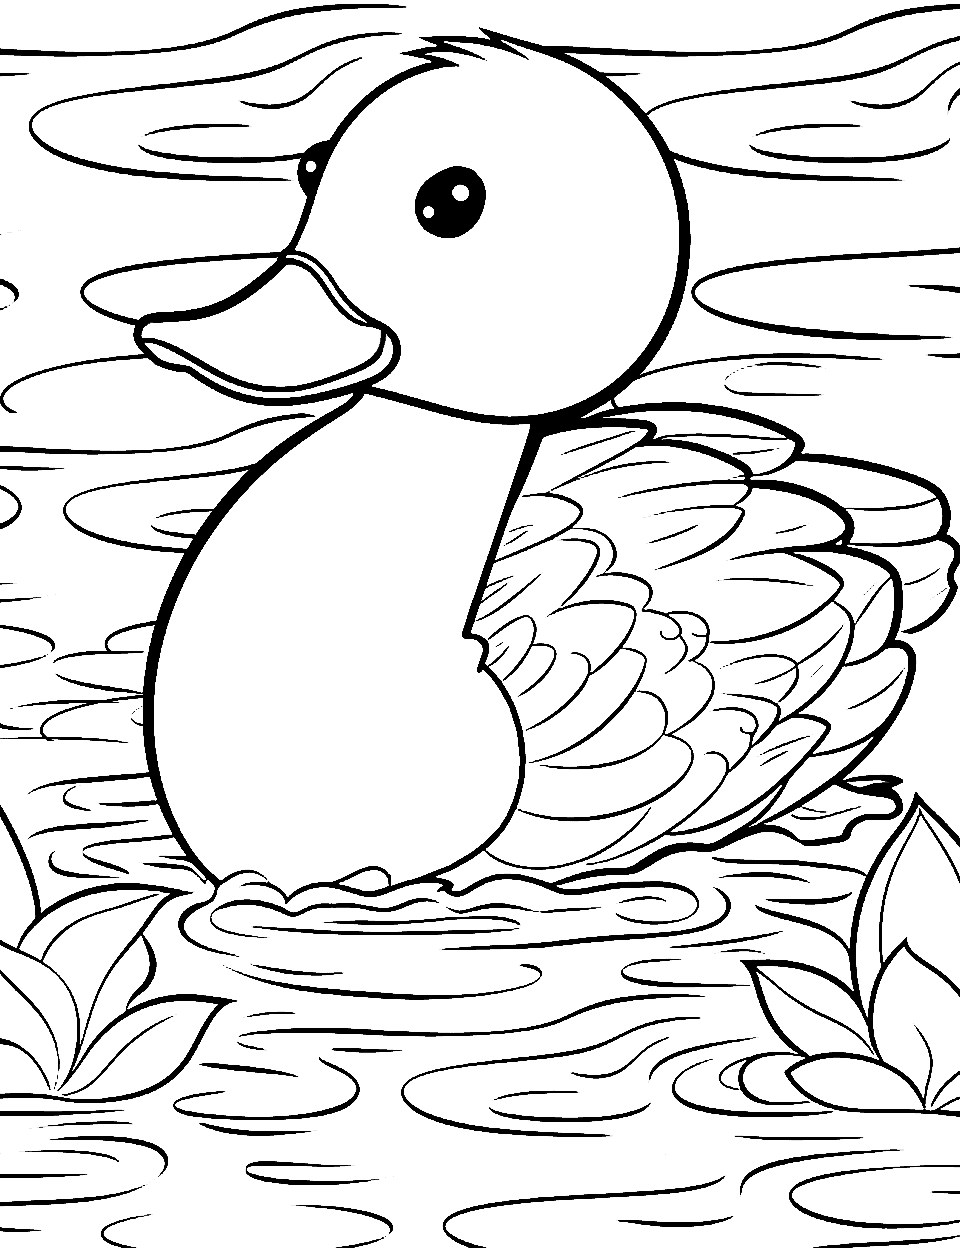 Quacker Quarters Coloring Page - A Duck swimming in a pond.